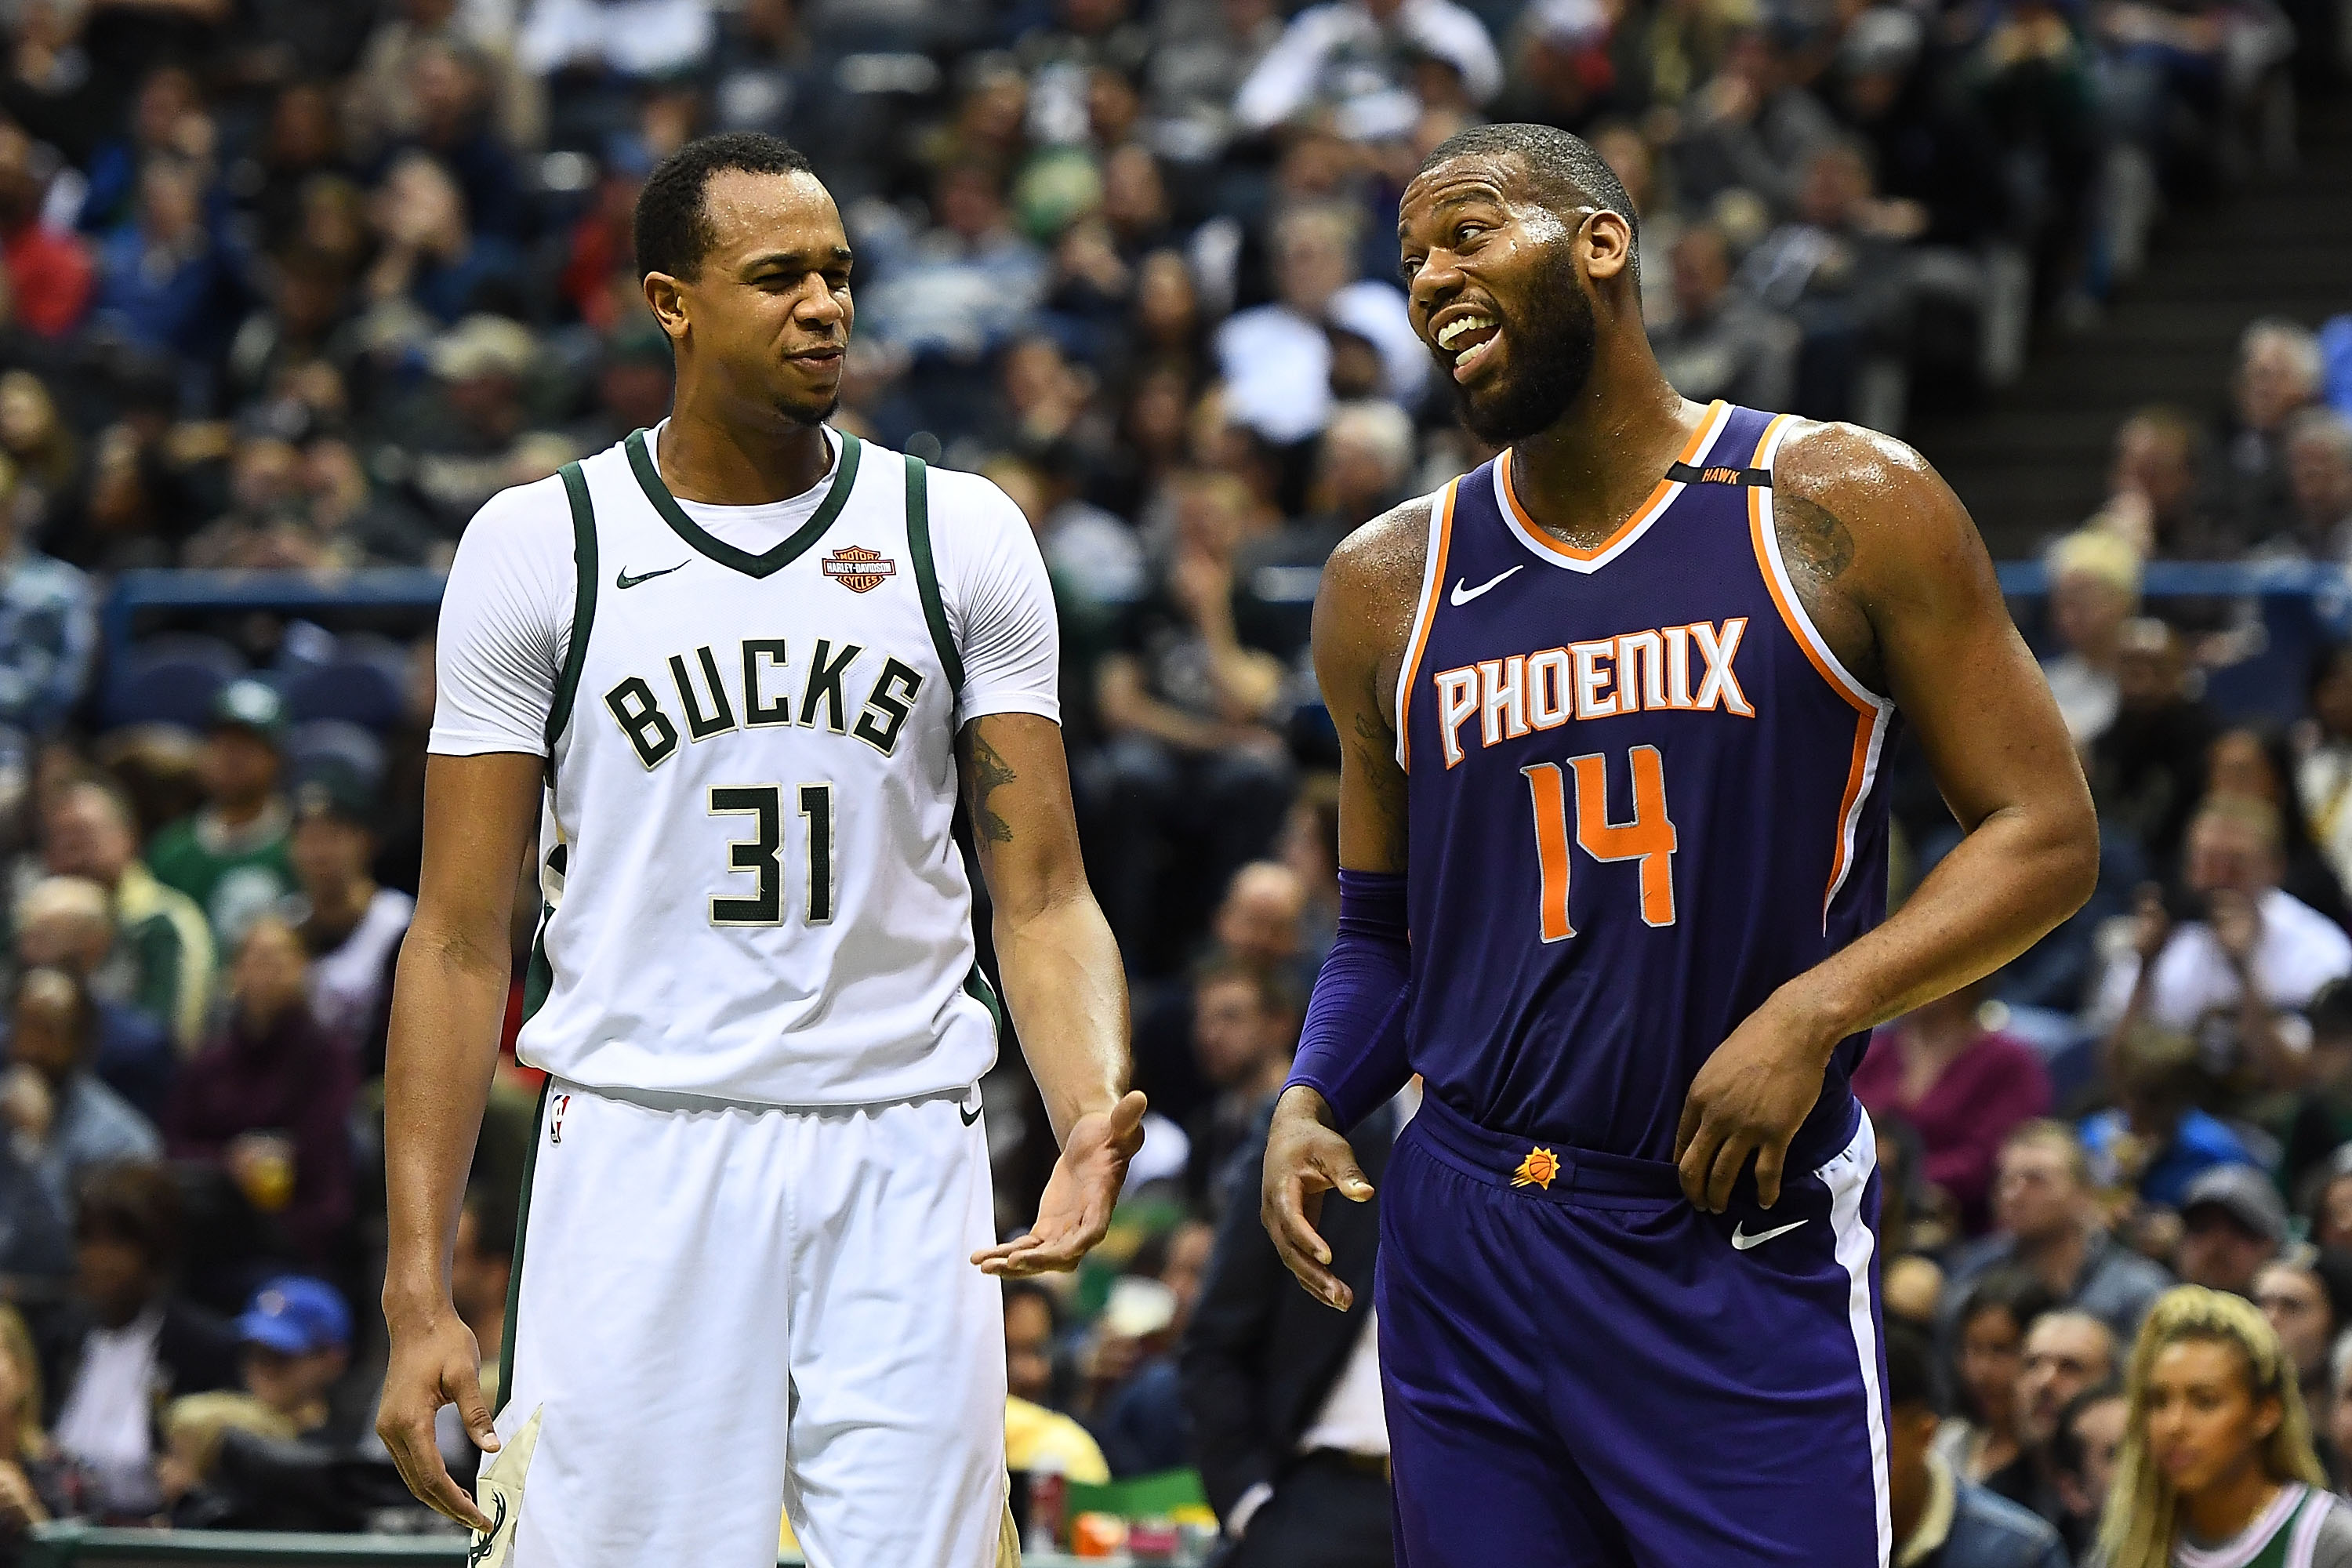 NBA, Greg Monroe make history with record number of players